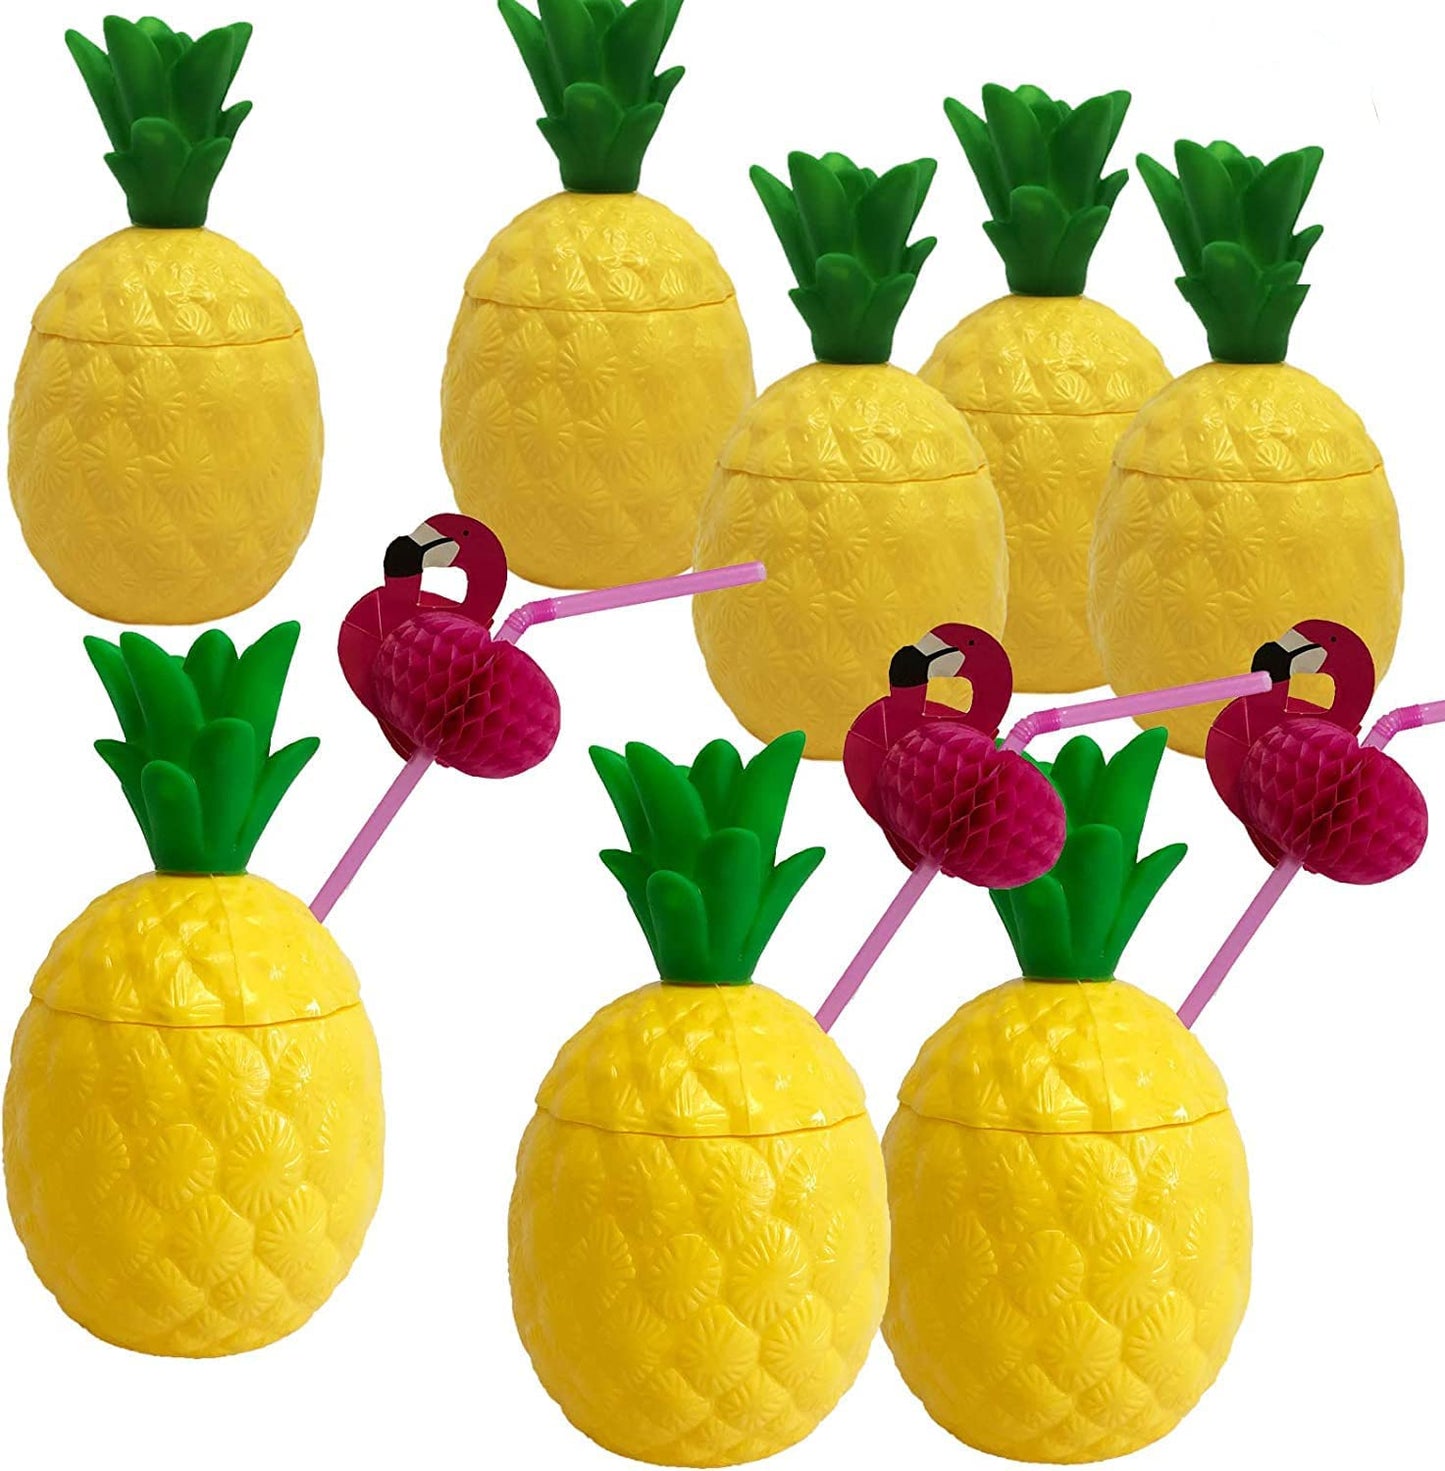 GIFTEXPRESS Plastic Pineapple Cups with Straws